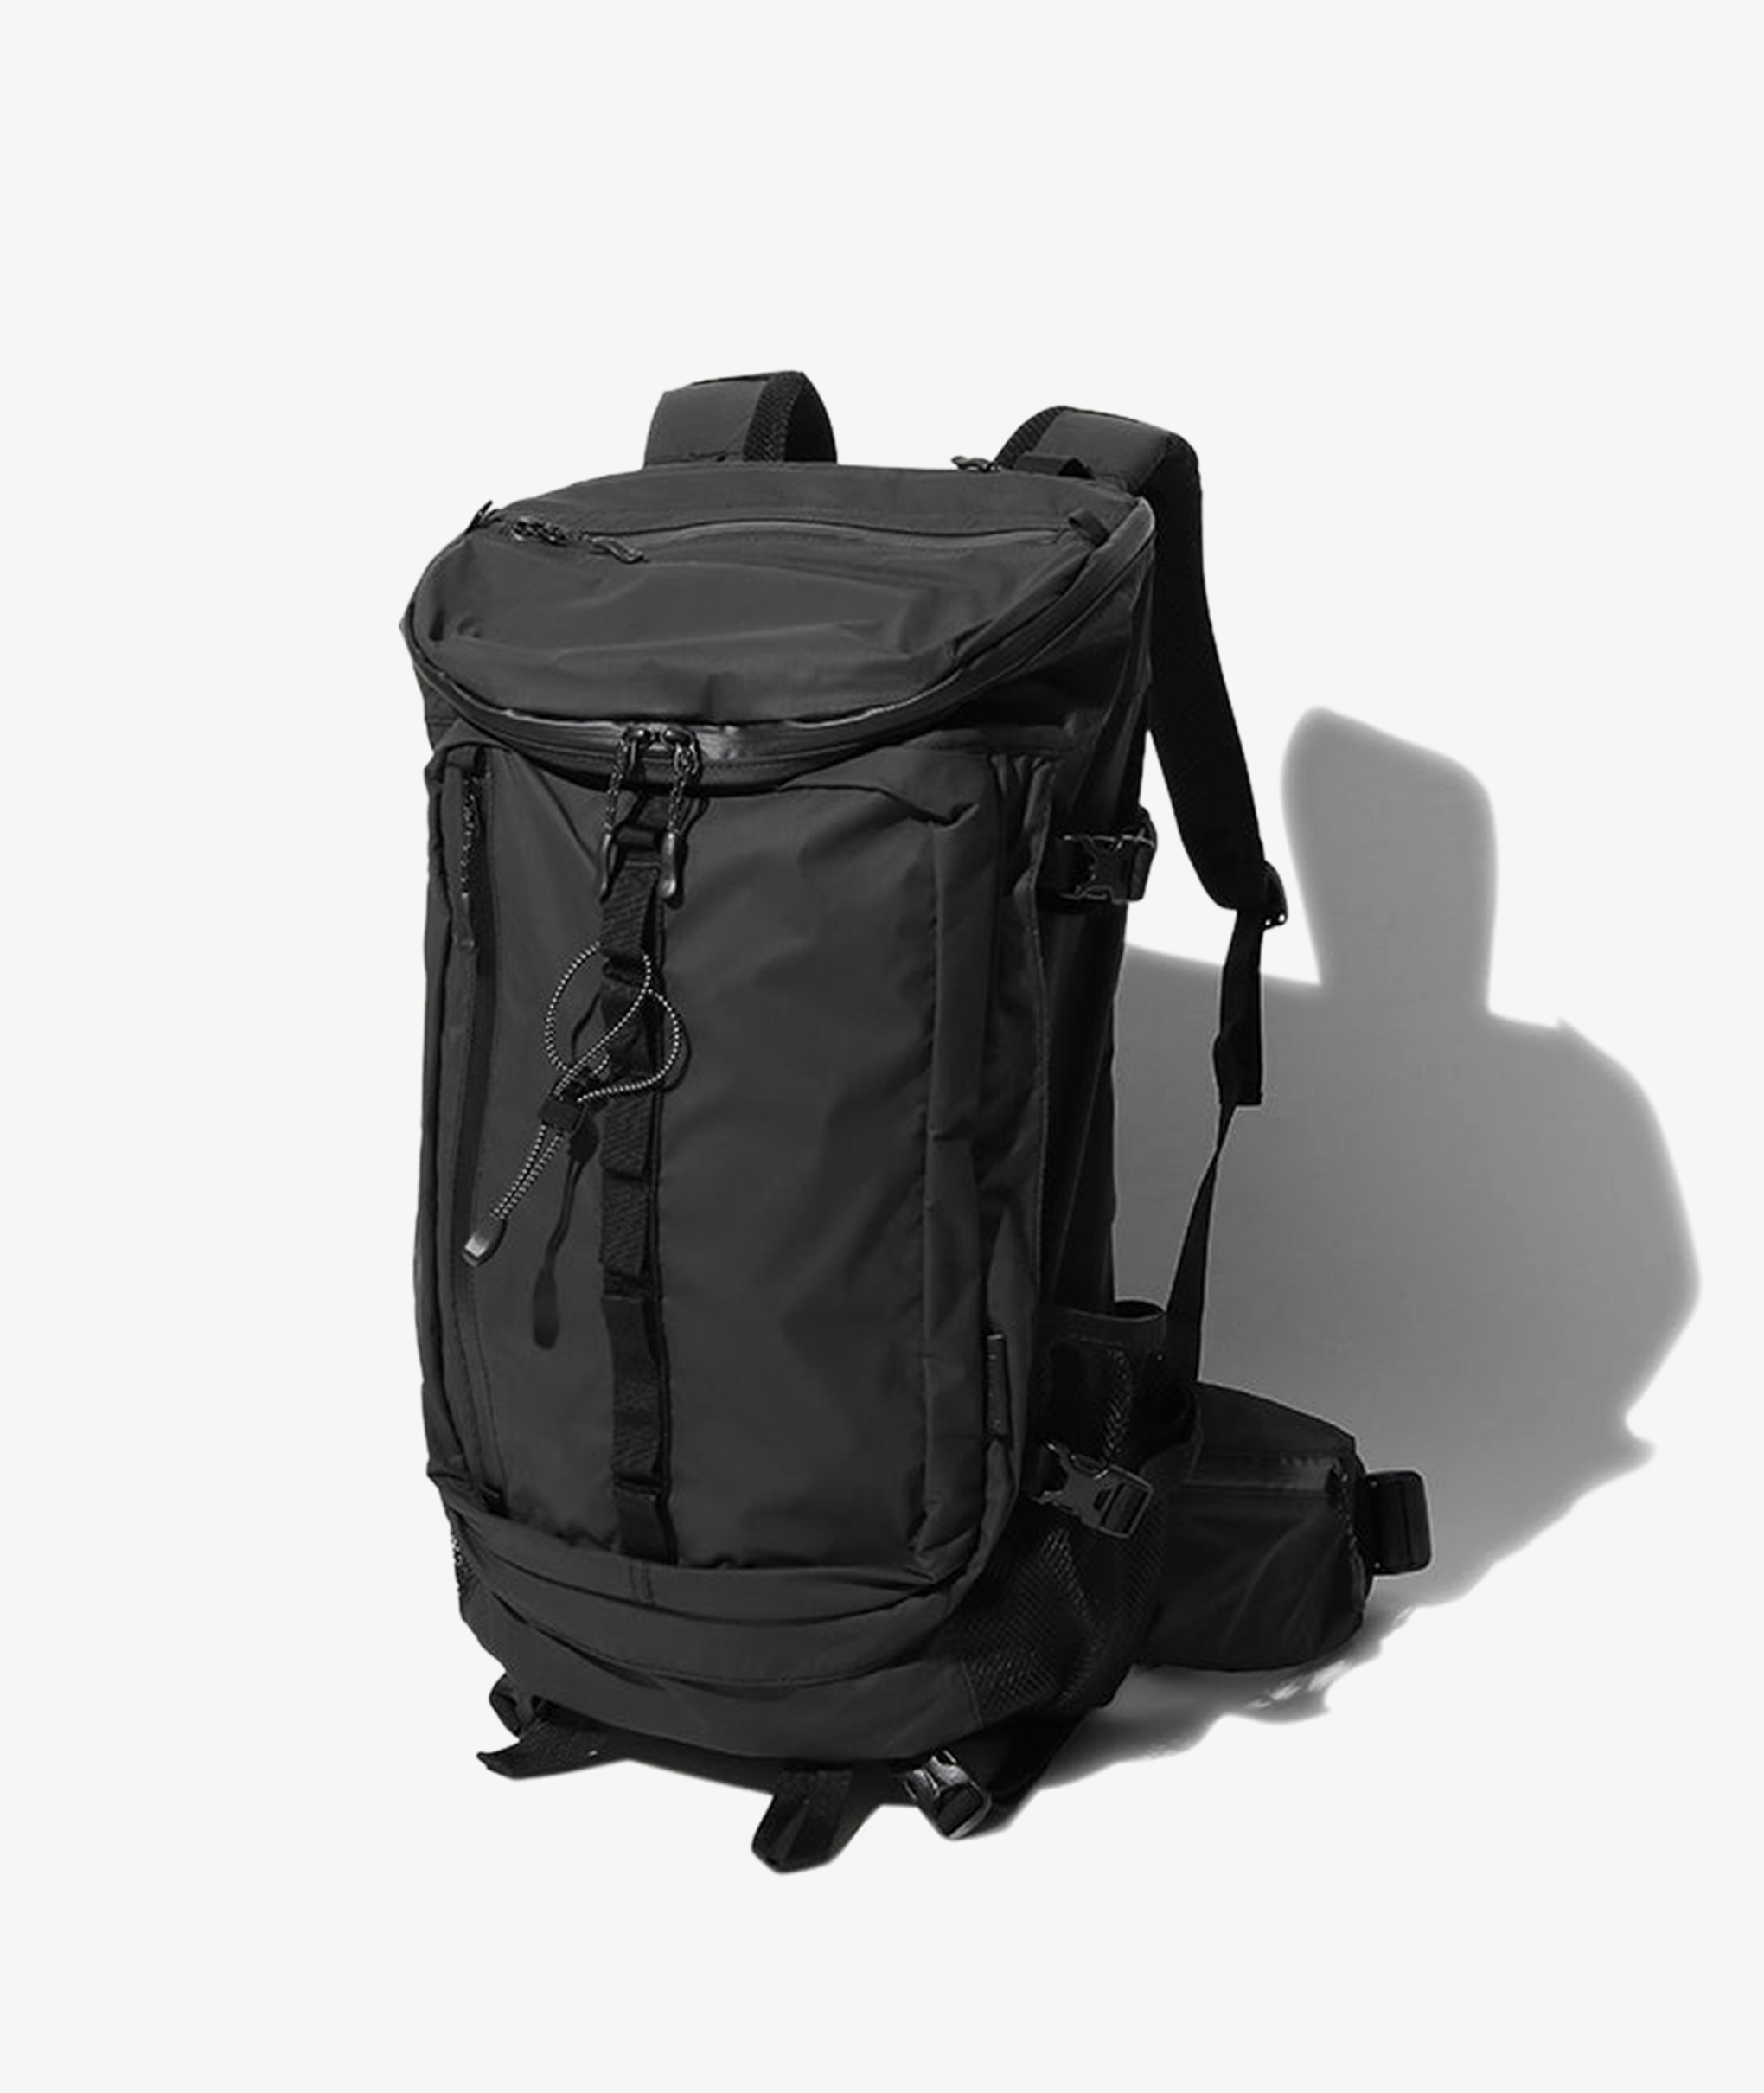 Norse Store | Shipping Worldwide - Snow Peak Active Field Backpack 